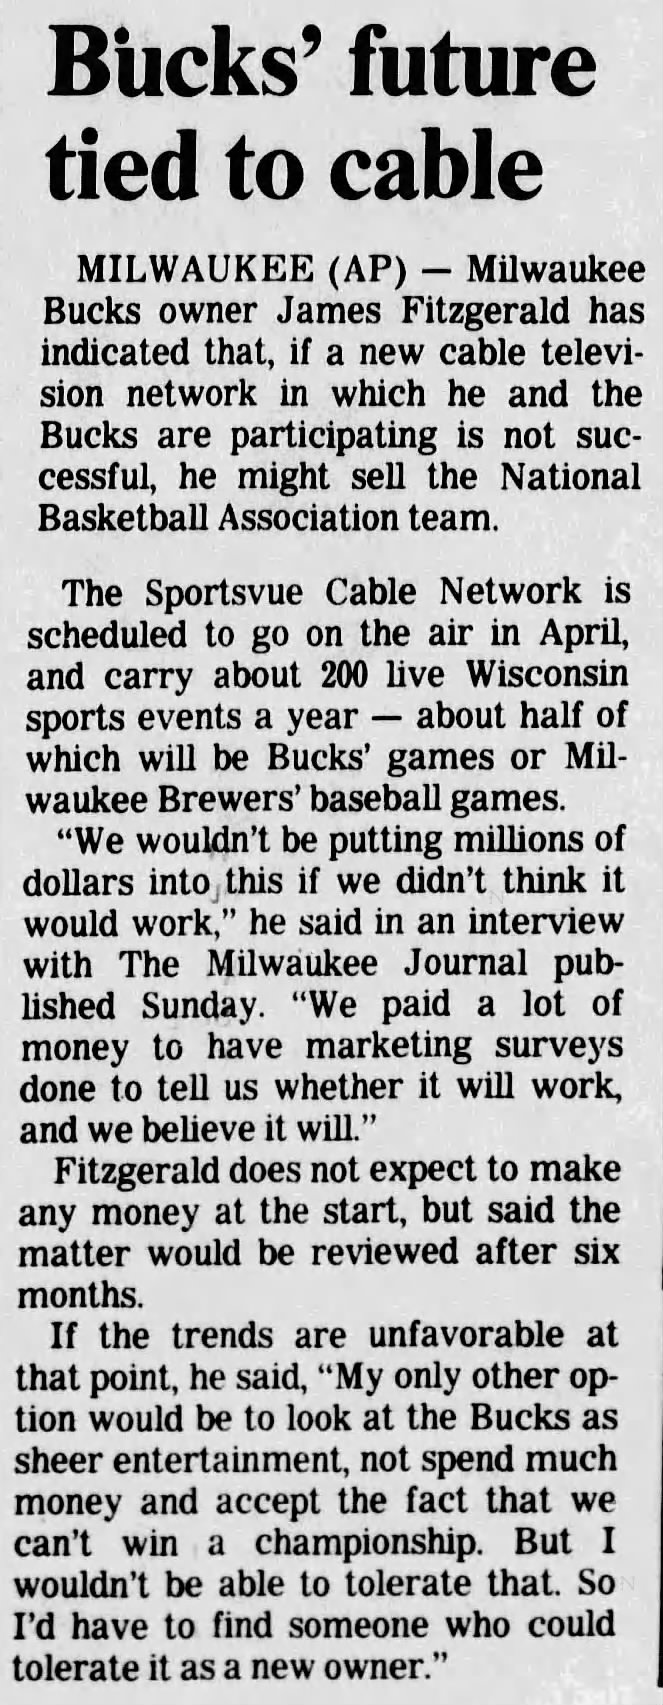 Bucks' future tied to cable